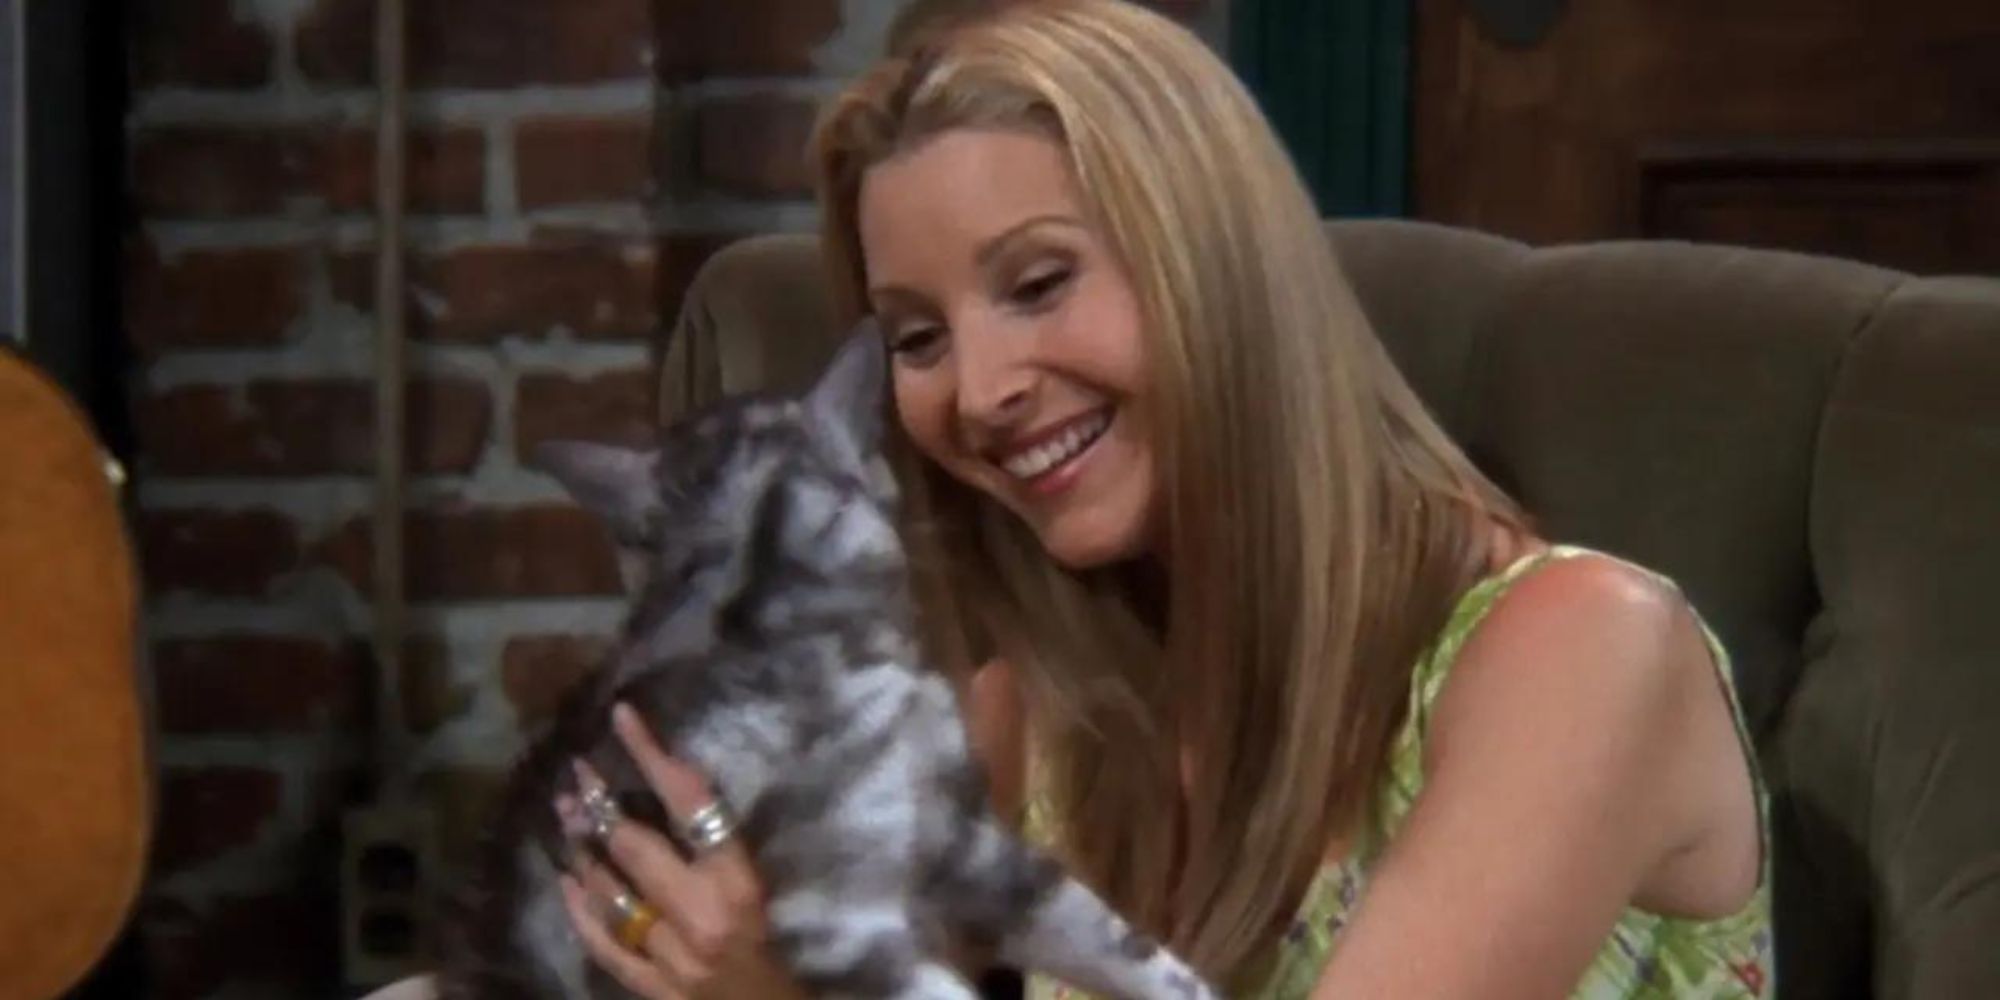 Phoebe Buffay smiling at a cat in Friends